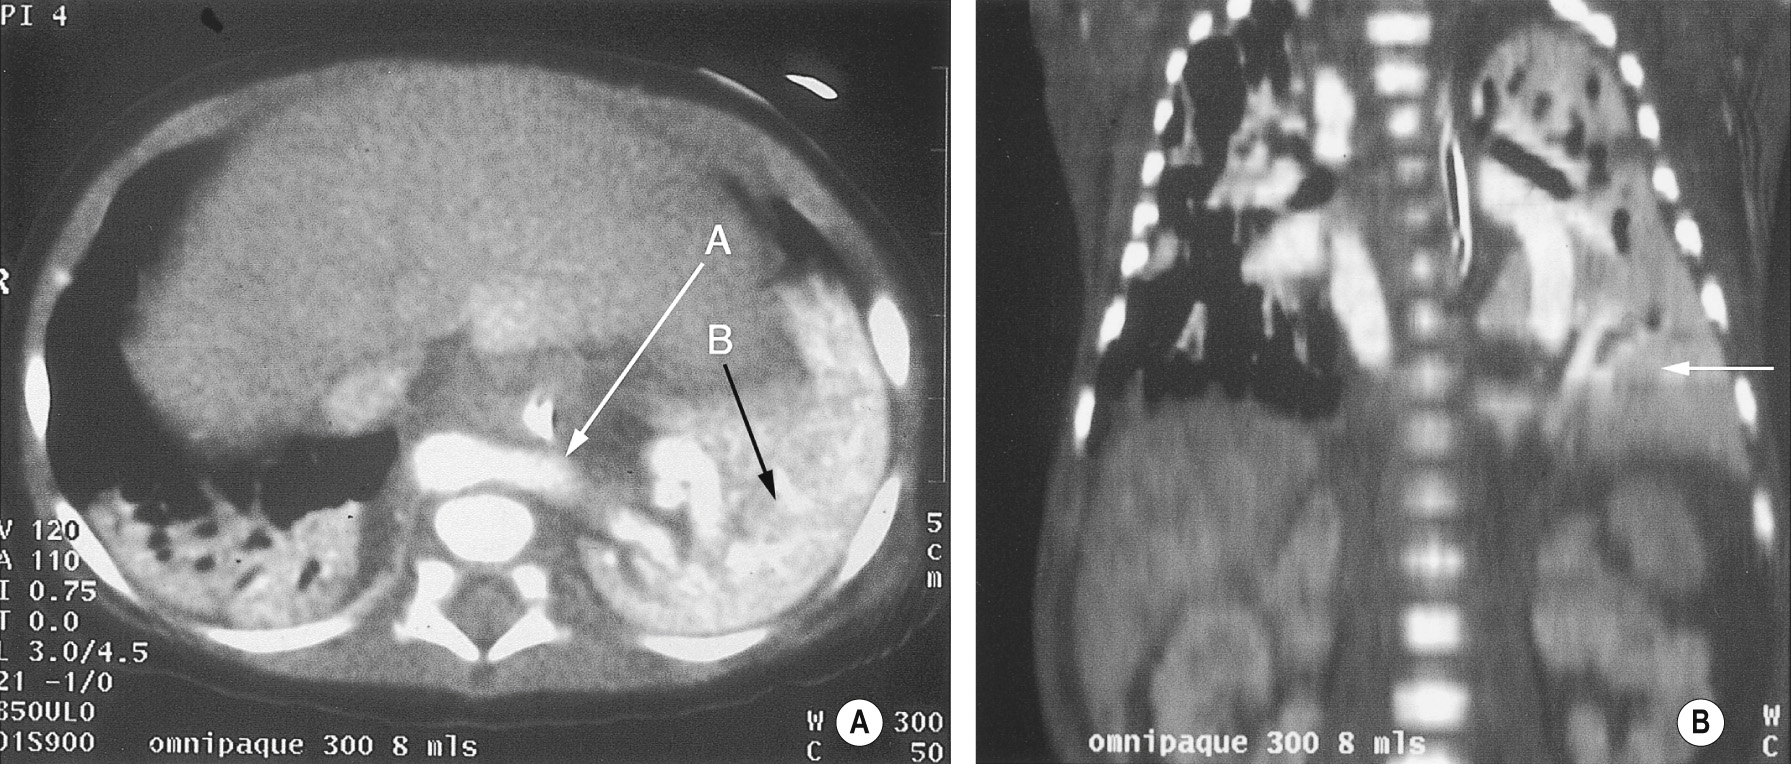 (A) Axial CECT through the lung bases with a large systemic vessel arising from the left side of the aorta (arrow A) supplying a very vascular left-sided extralobar sequestration (arrow B). (B) Coronal CT showing the normal lung and beneath this (arrow) the left-sided basal extralobar sequestration with a draining vein entering the azygous system below the diaphragm. †